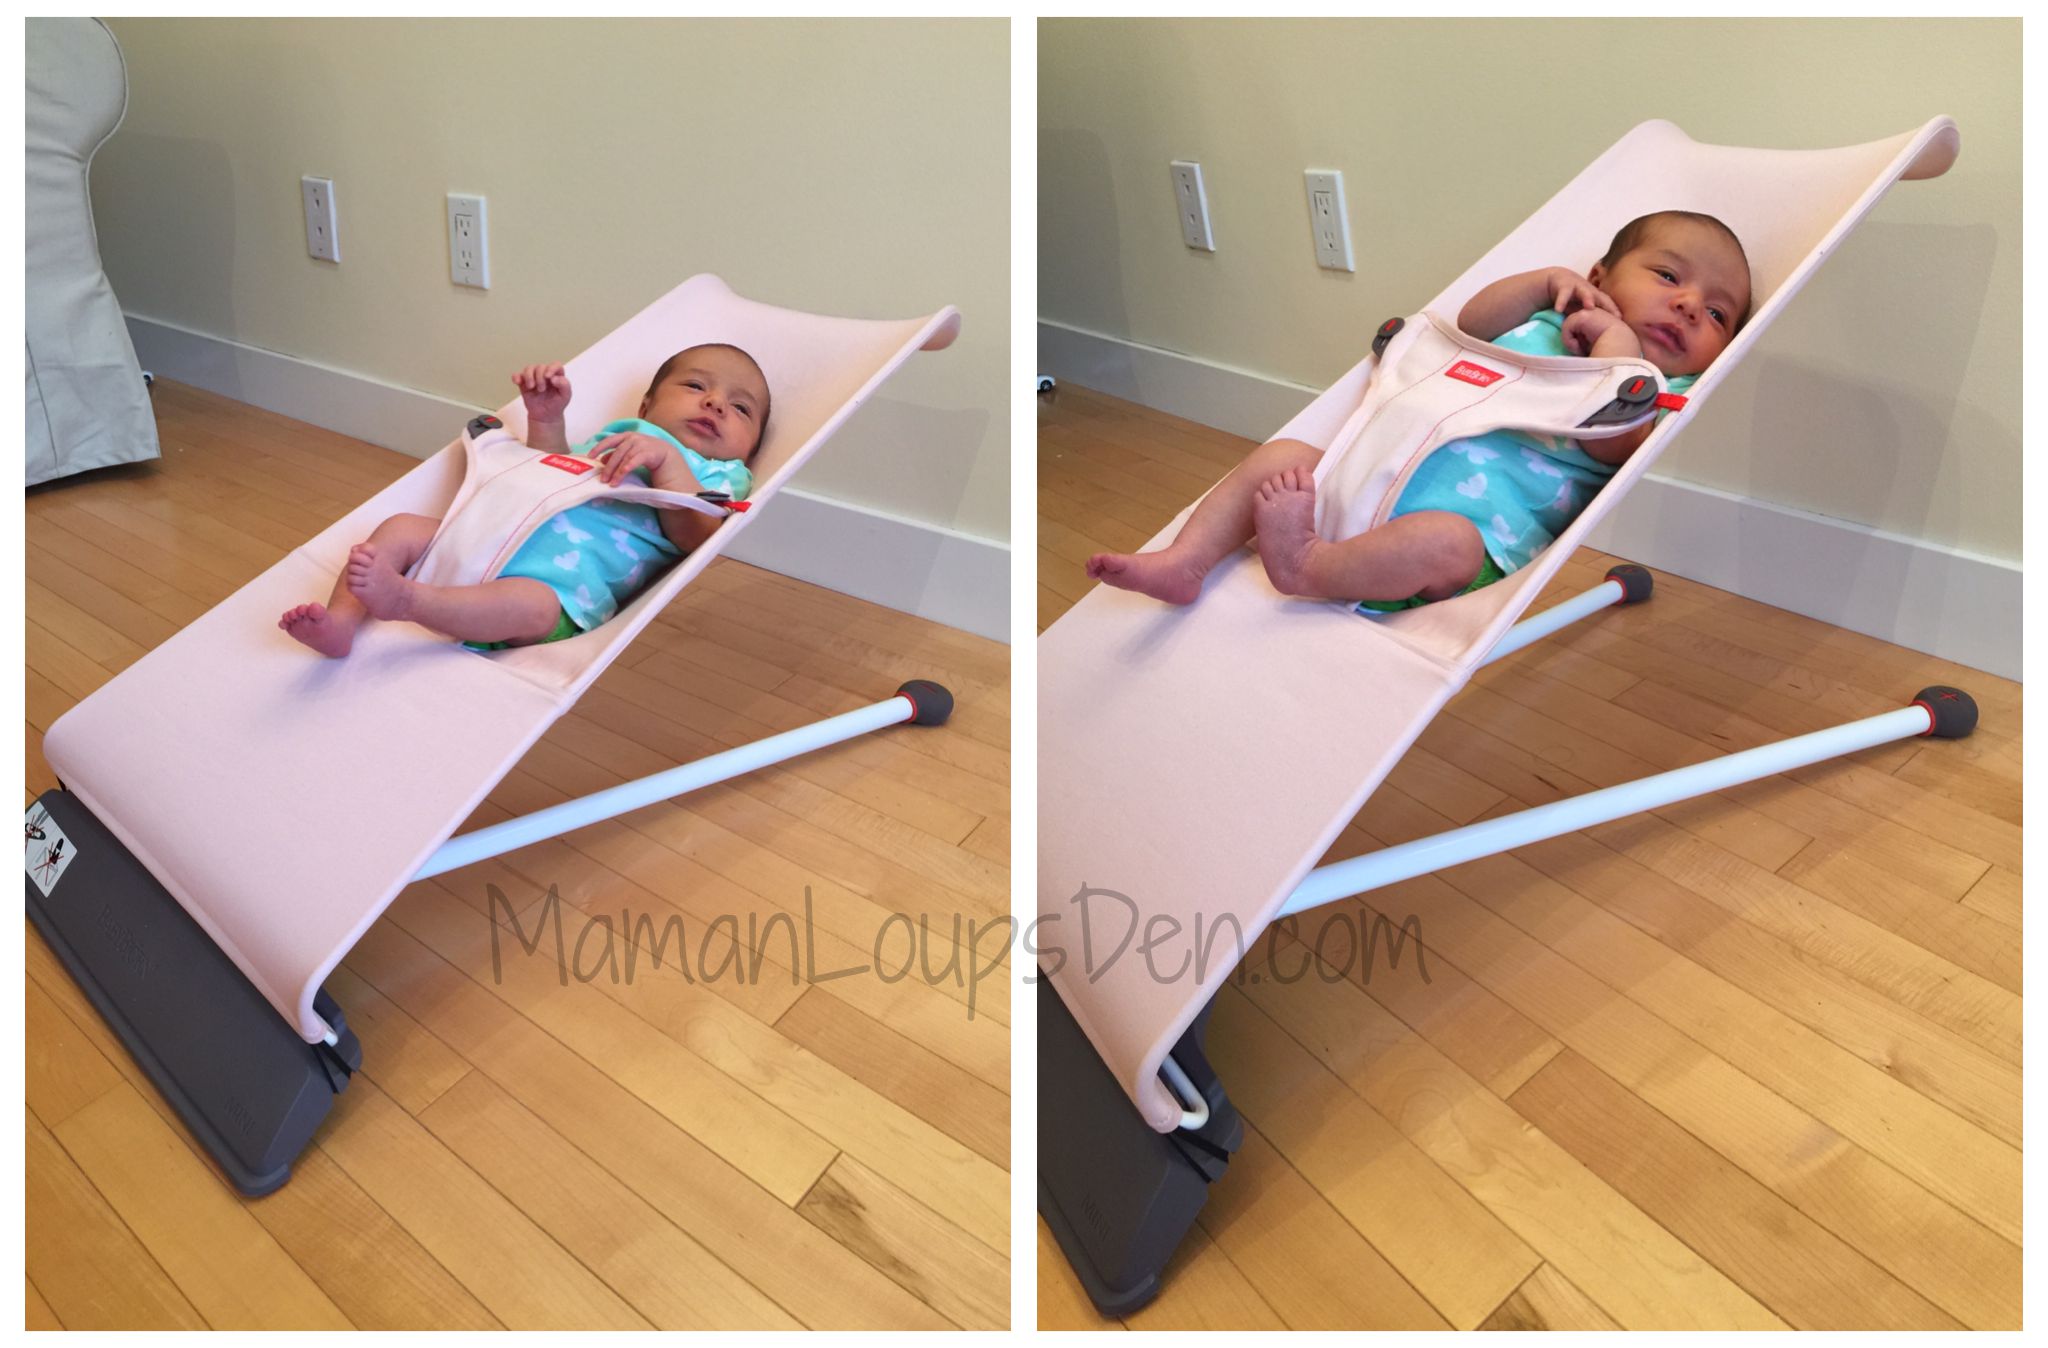 age to use baby bjorn bouncer